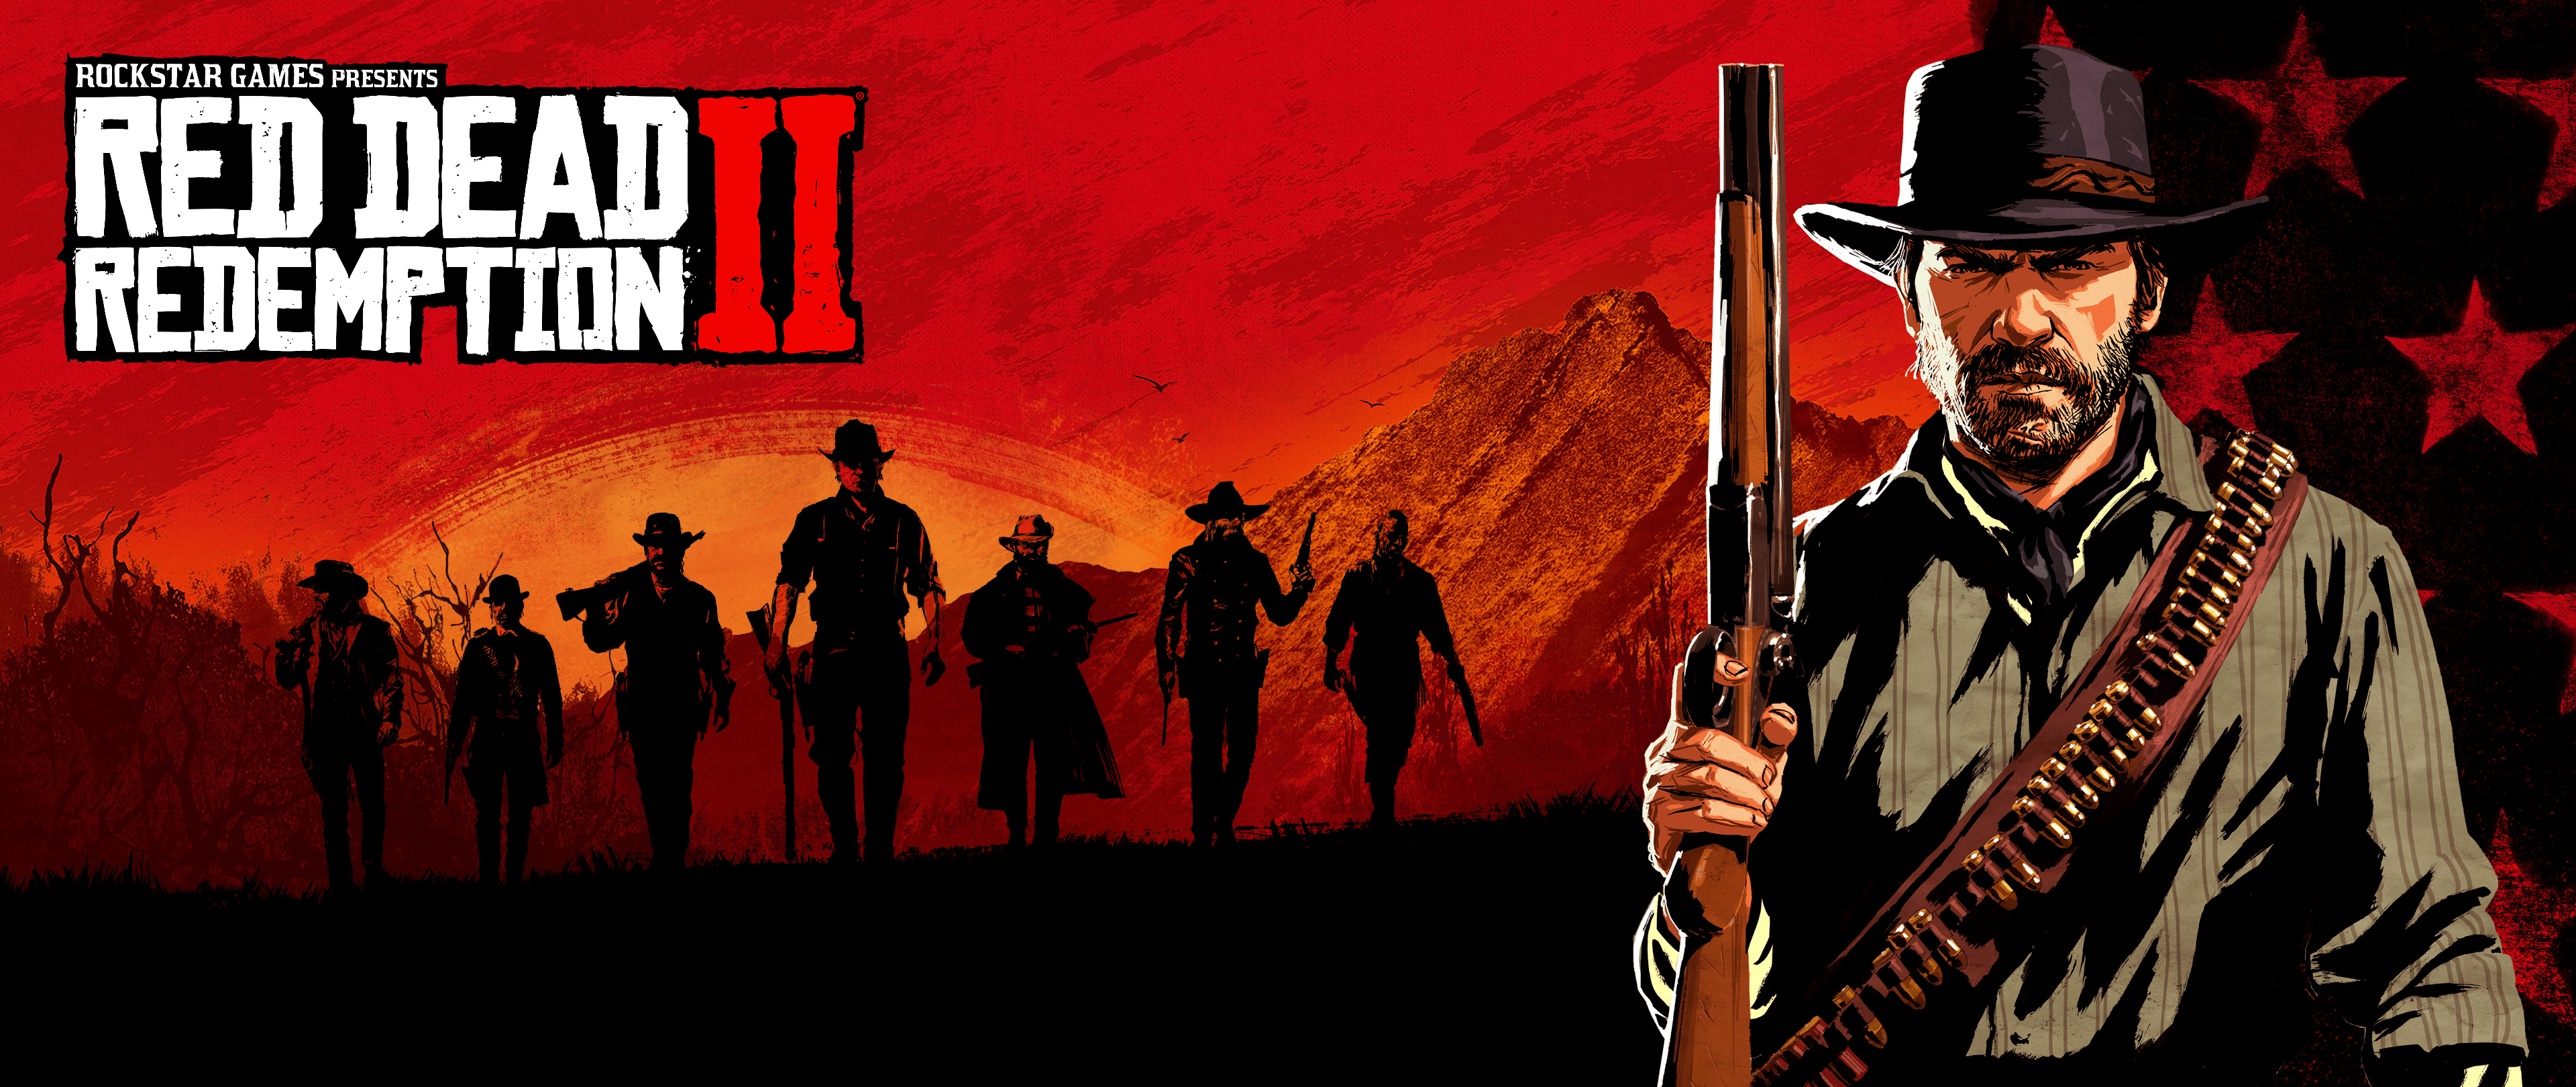 Red Dead Dual Monitor Wallpapers - Top Free Red Dead Dual Monitor ...